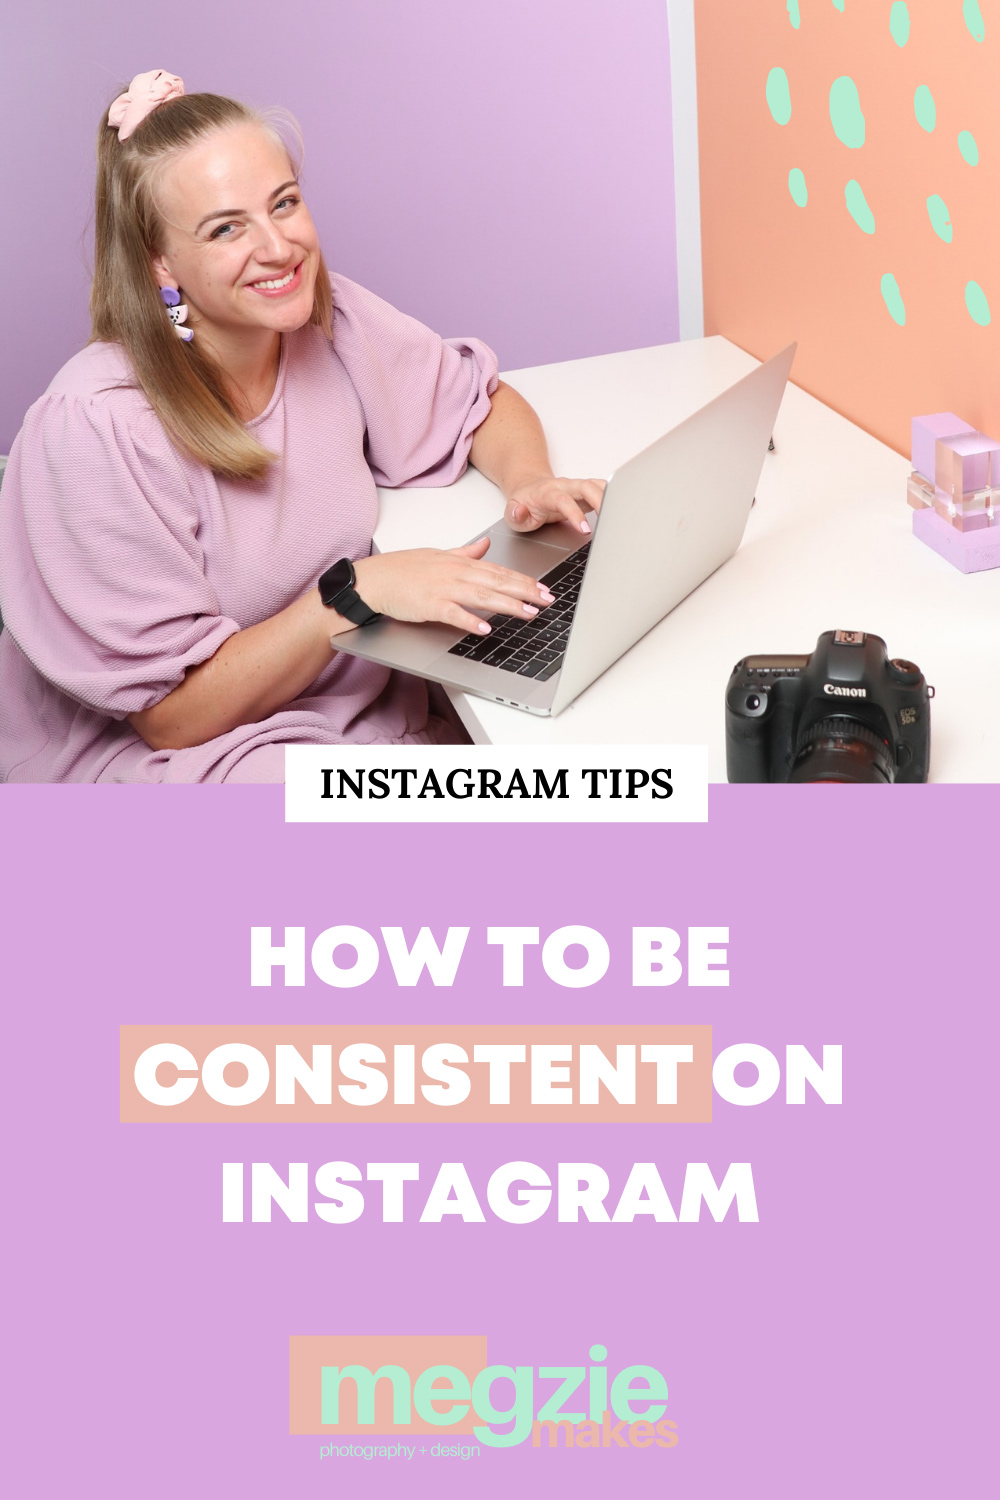 How to be consistent on Instagram